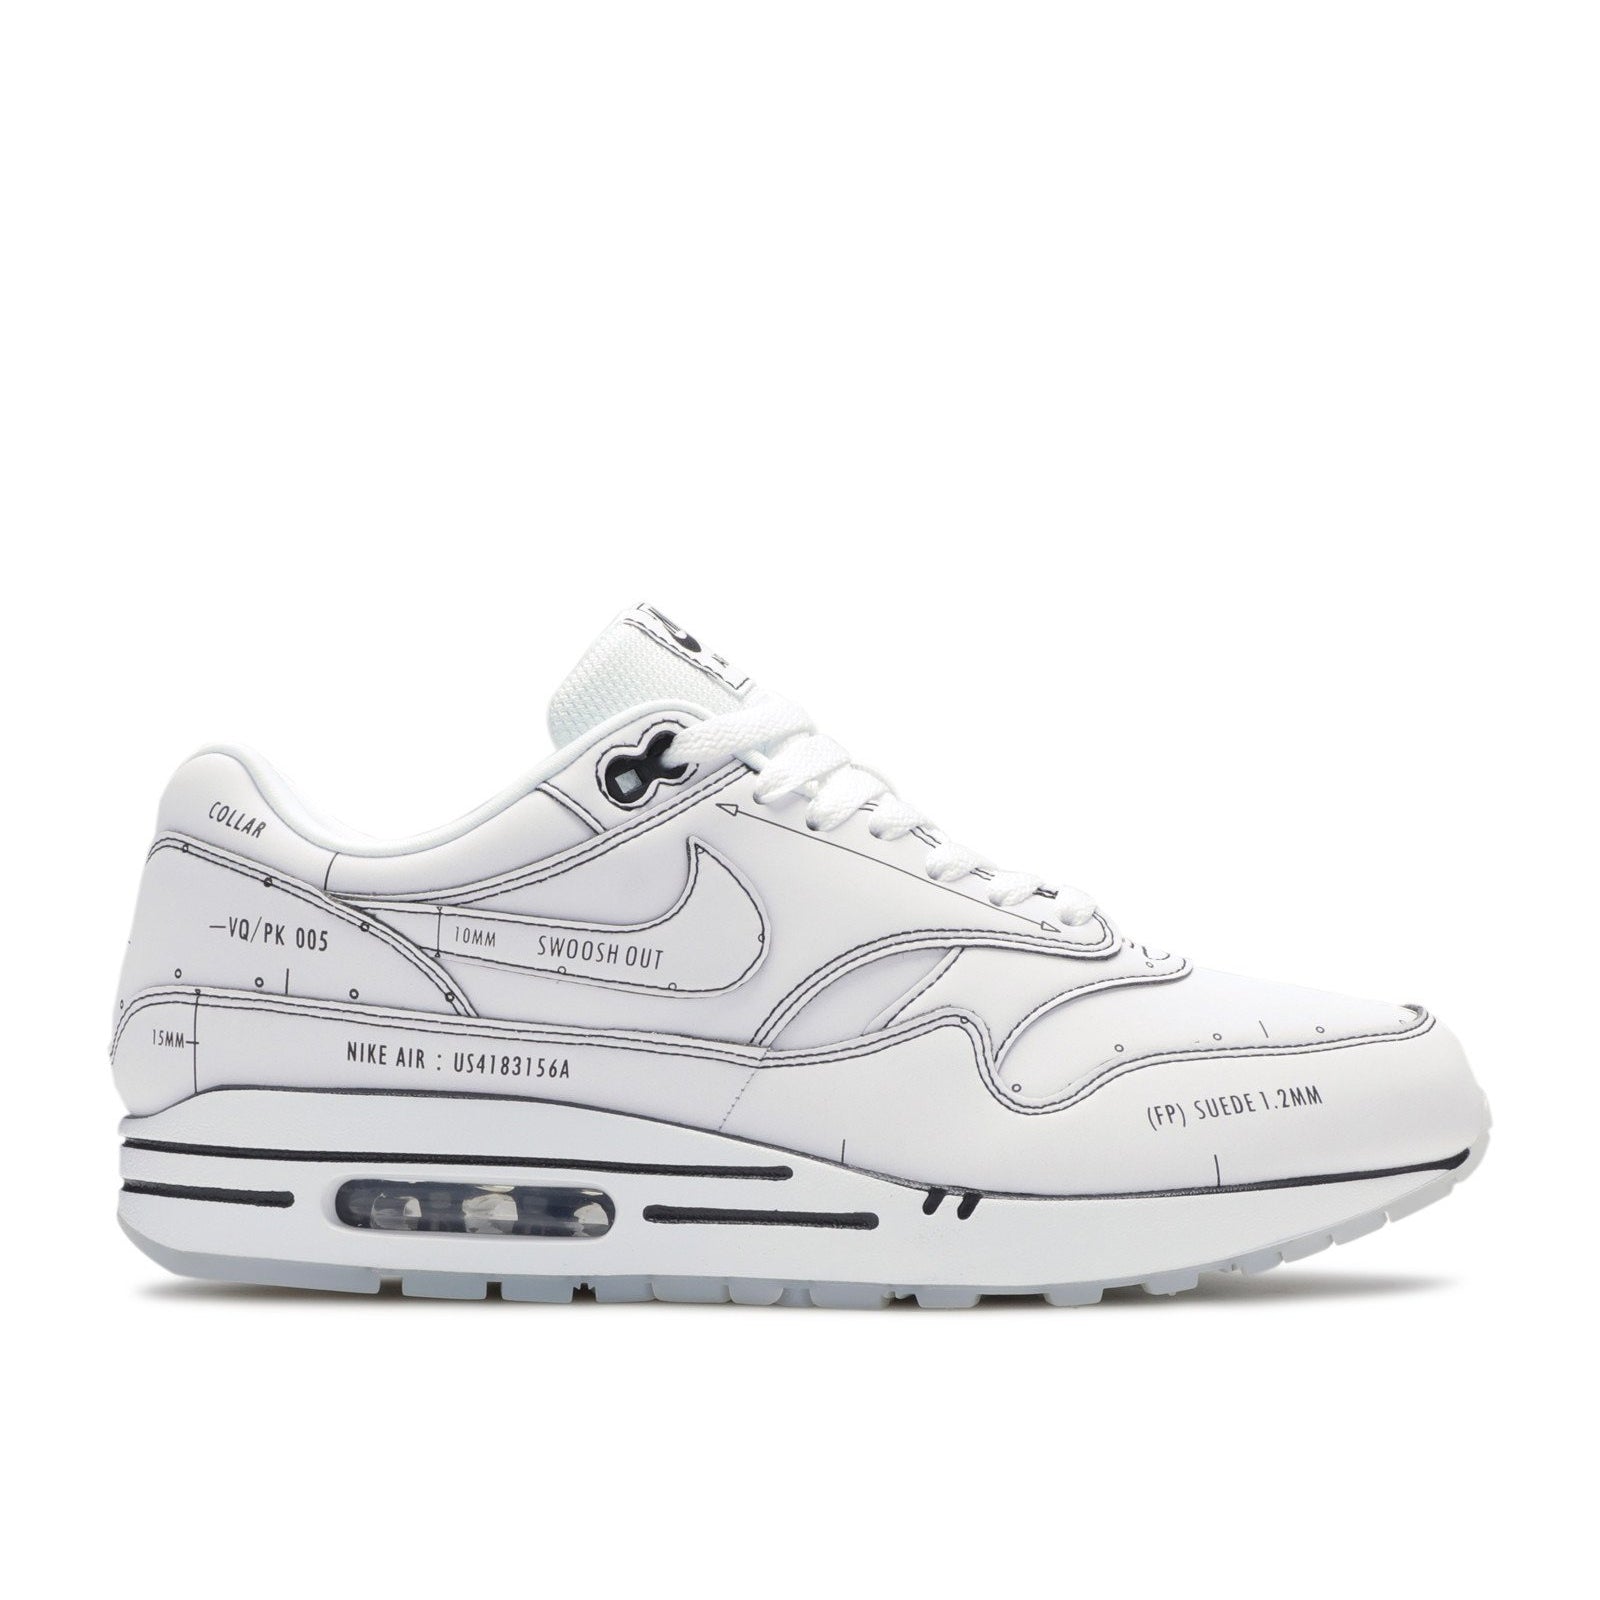 Nike Airmax 1 Sketch to Self - Centrall Online